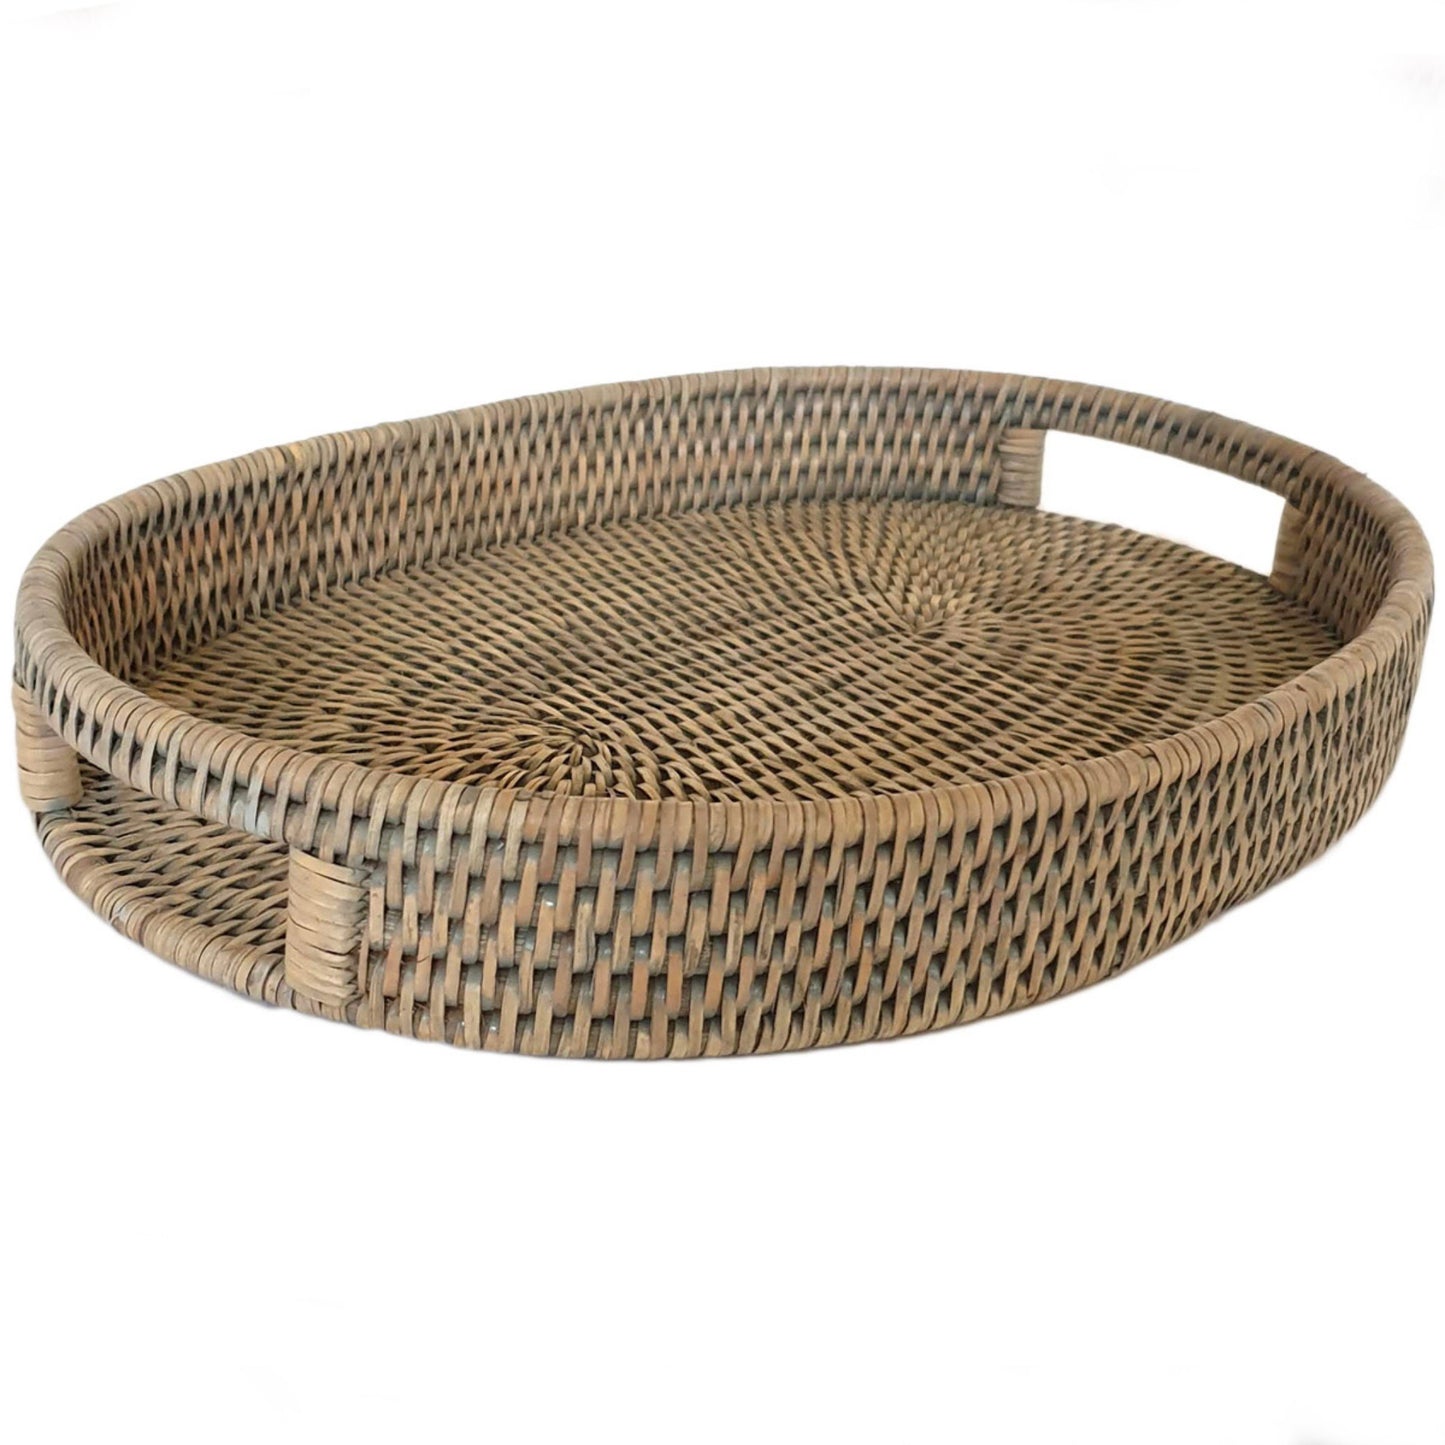 Burghley Oval Rattan Tray